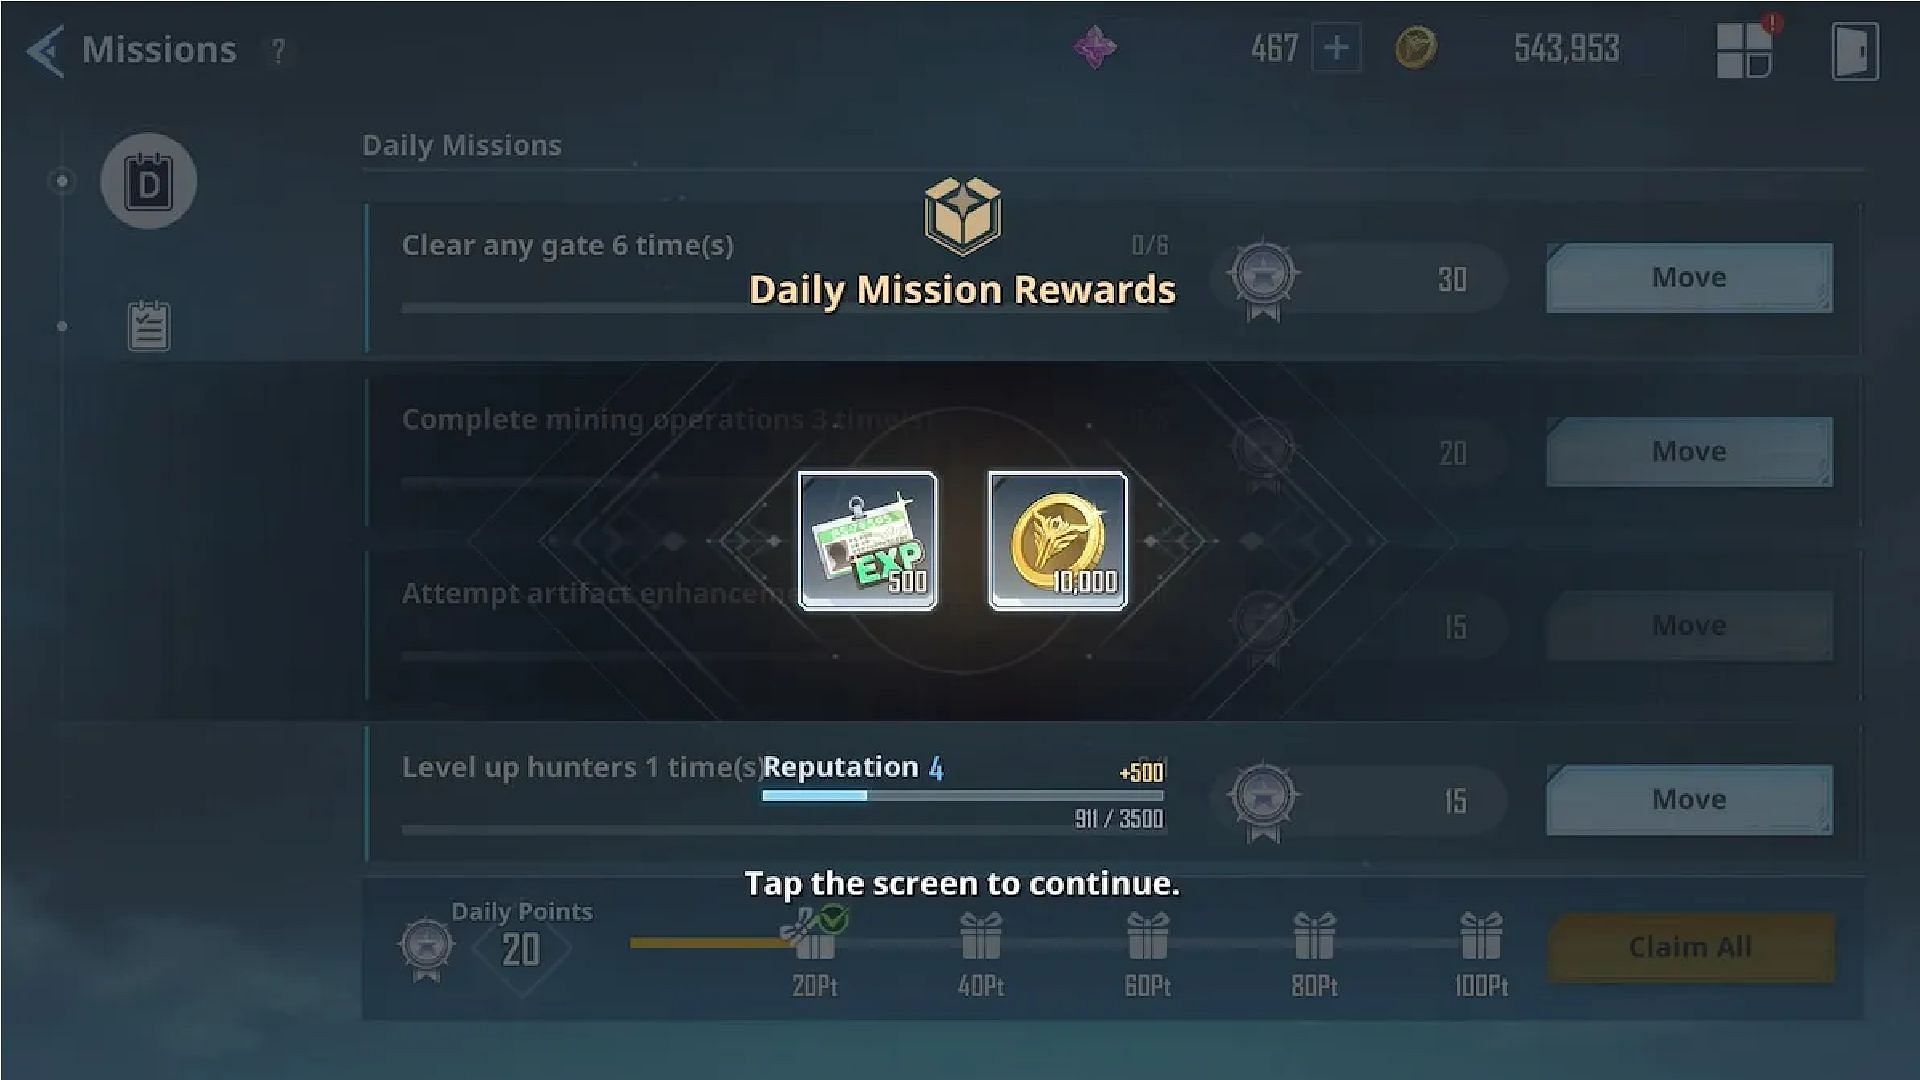 You can earn 500 points by completing Daily Missions (Image via Netmarble)